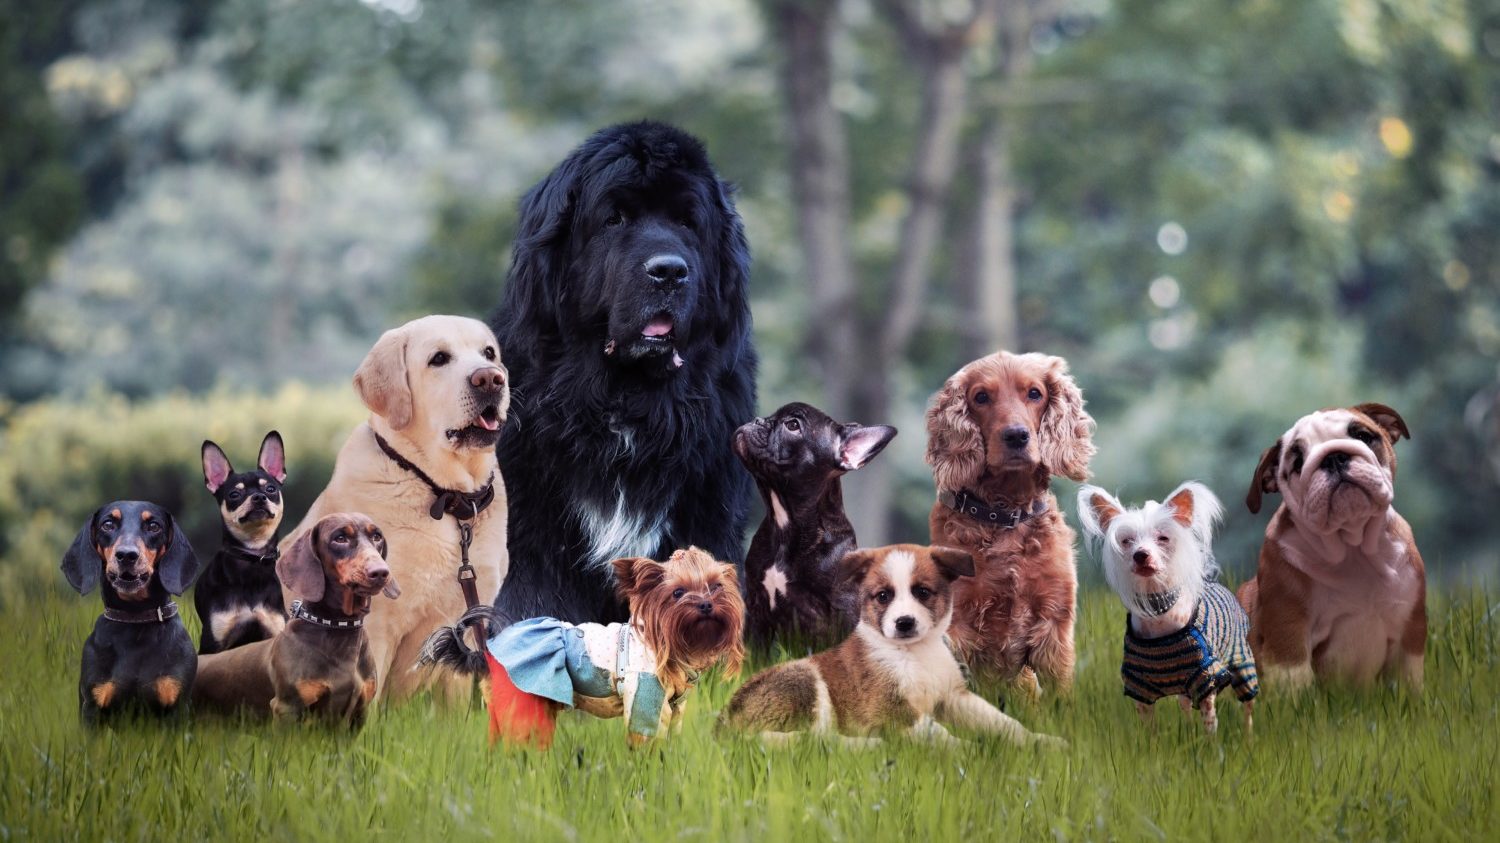 Many breeds of dogs gathered for portrait